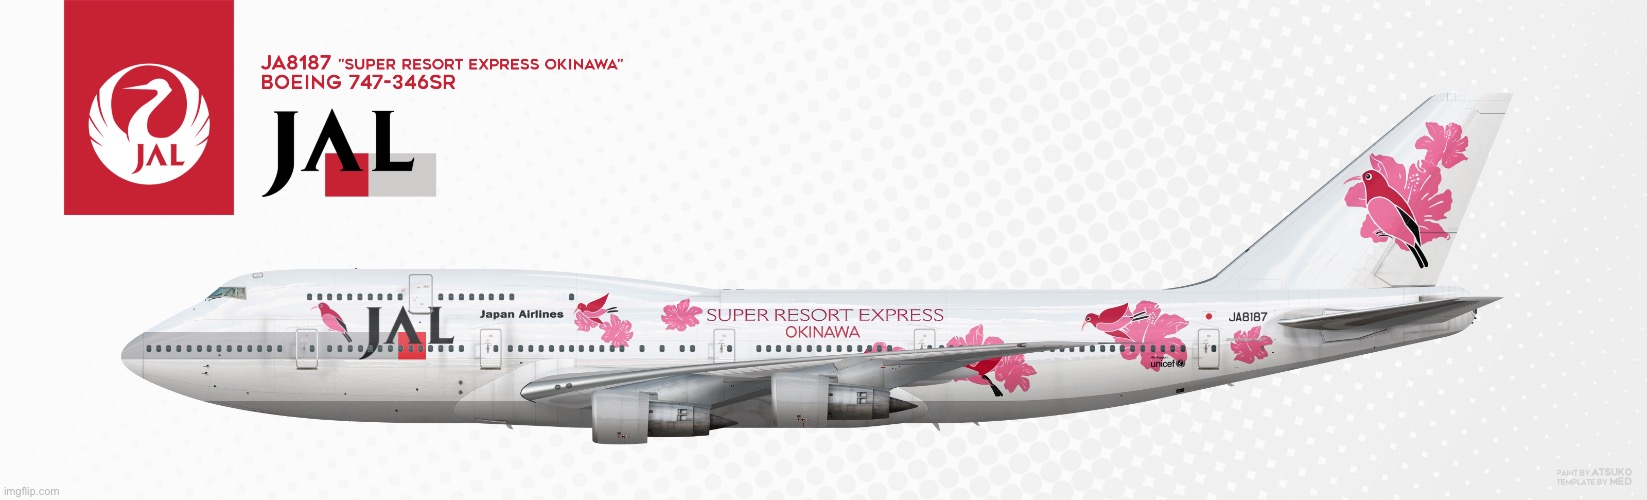 Japan Airlines 747-4 Super Resort Express Okinawa livery | image tagged in airplanes,japan | made w/ Imgflip meme maker